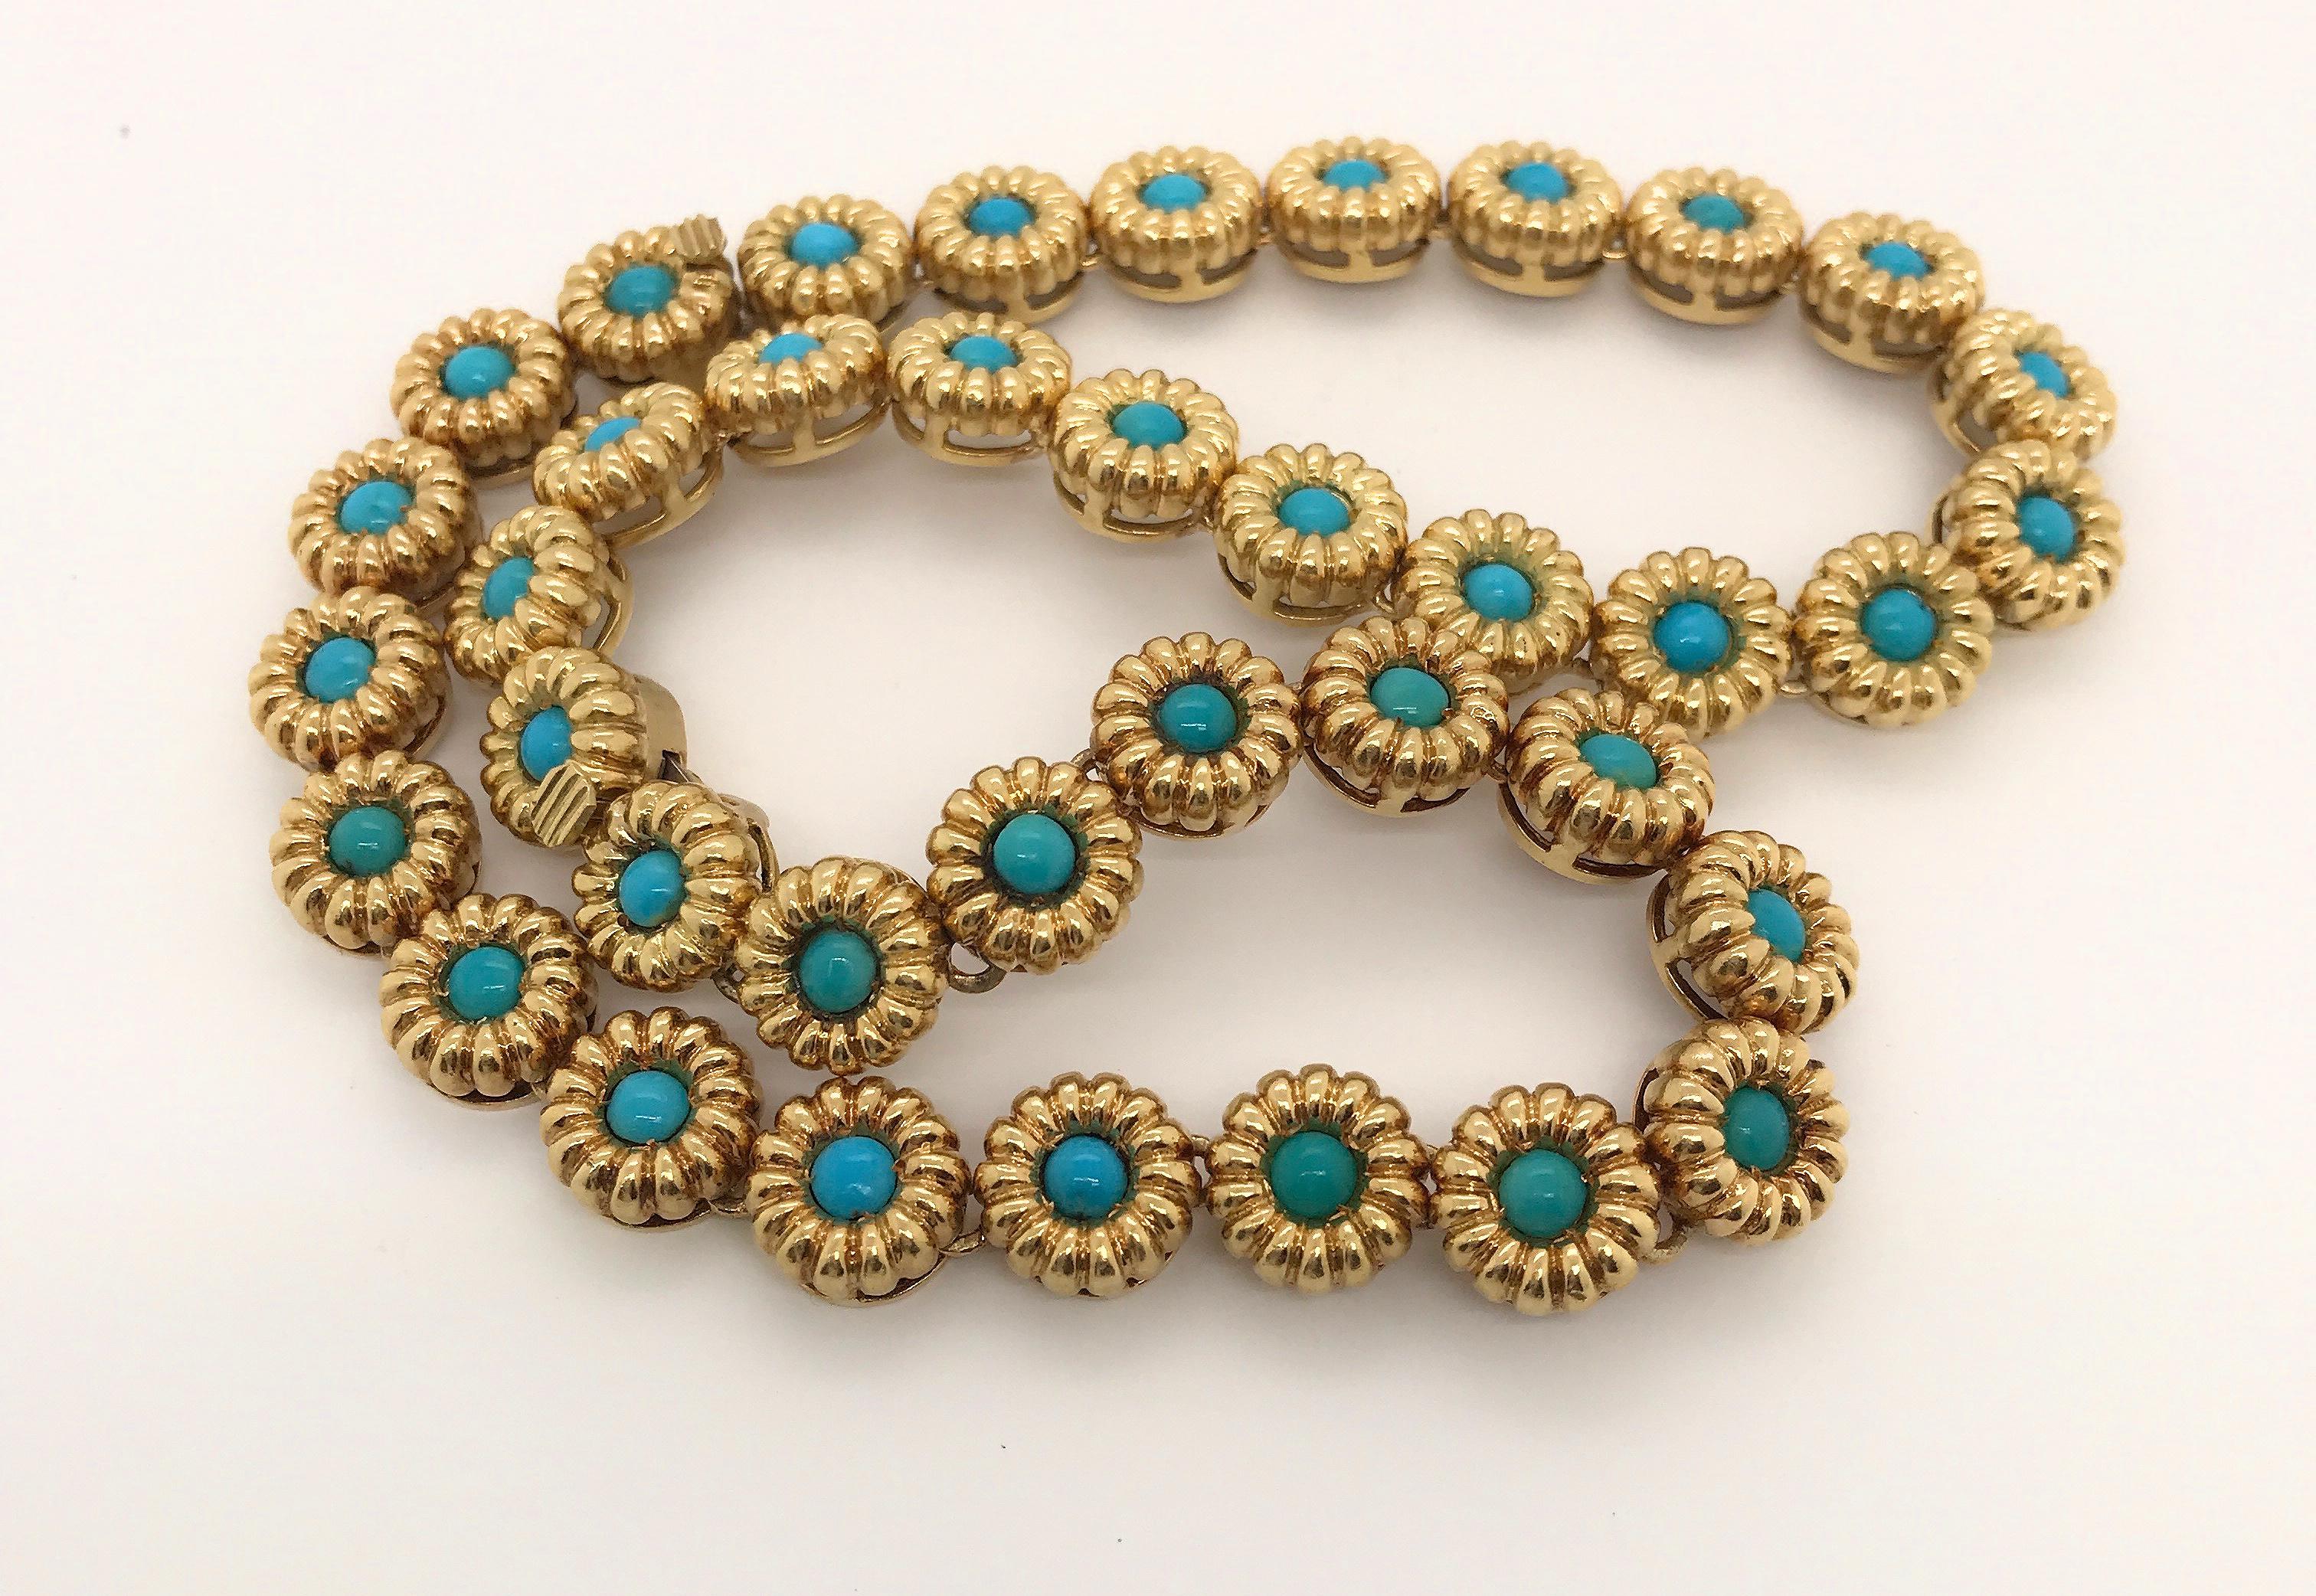 18 Karat Yellow Gold Turquoise Bracelets or Choker Necklace For Sale 8